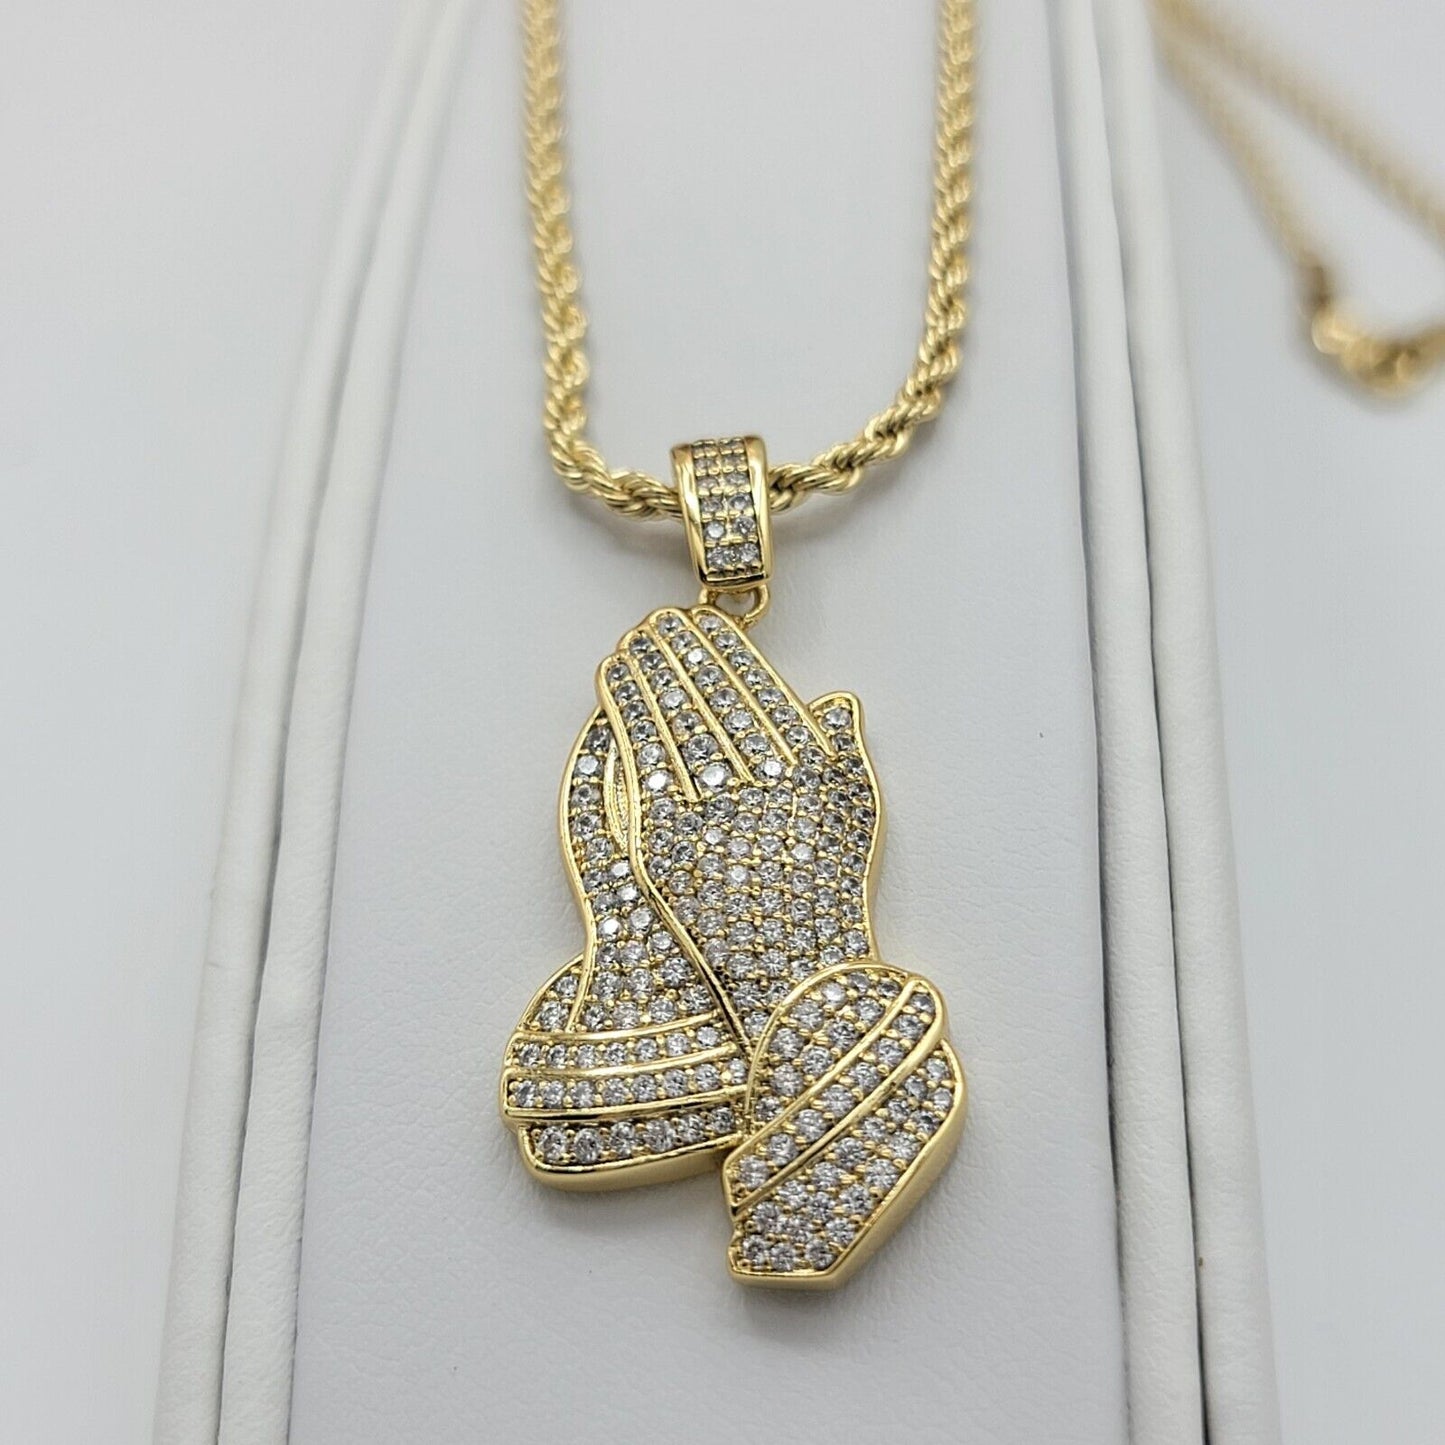 Necklaces - 14k Gold Plated. Praying Hands LET'S PRAY Pendant & Chain.